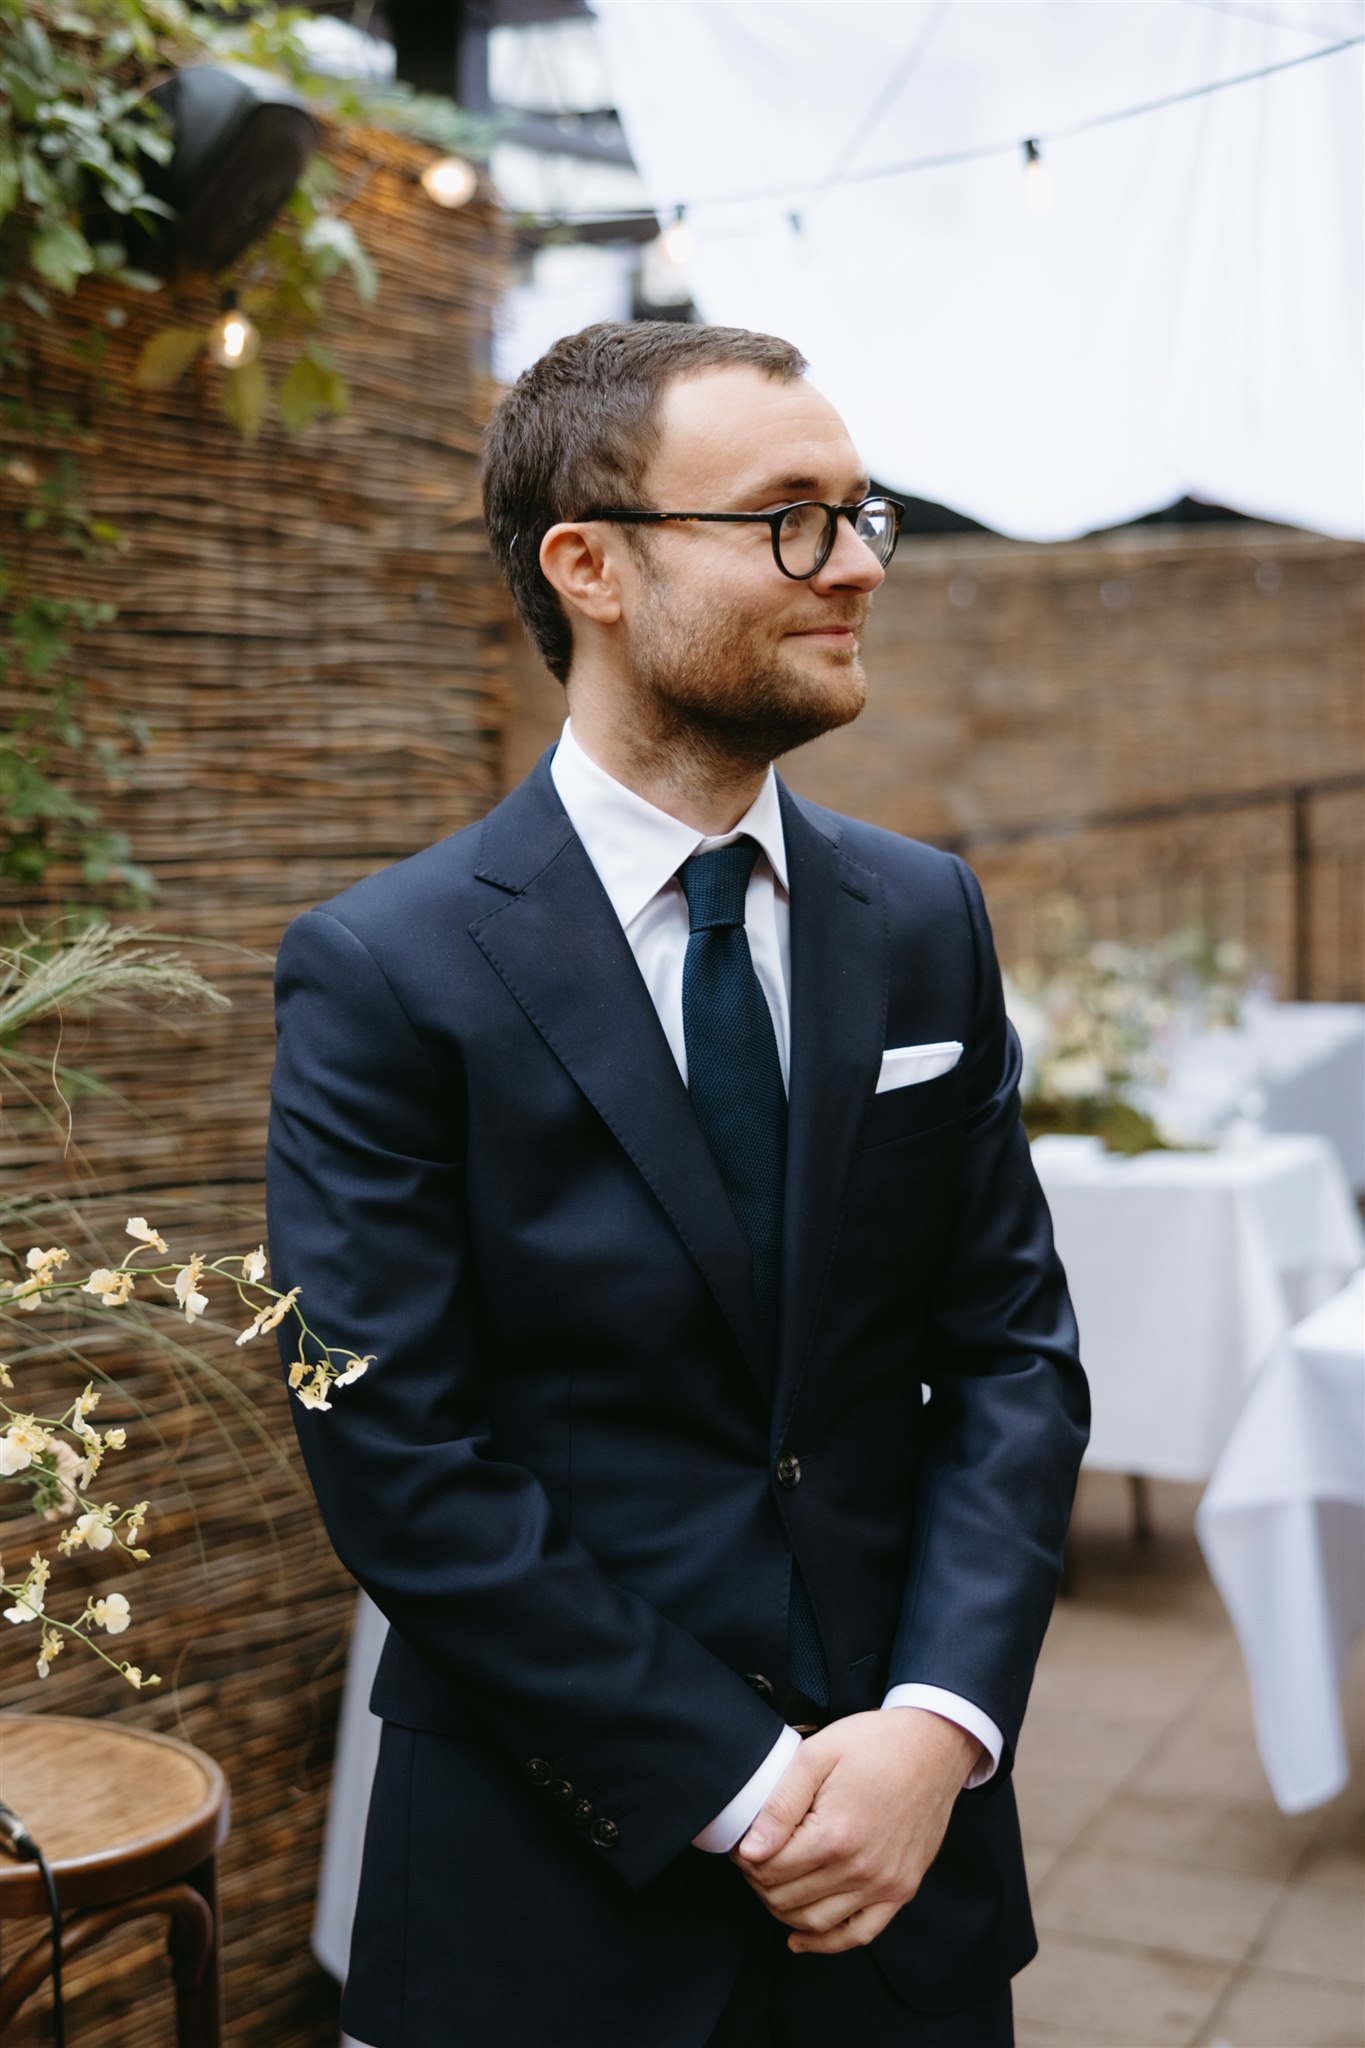 A man in a dark suit and tie with glasses smiles gently while standing in a decorated outdoor event space.